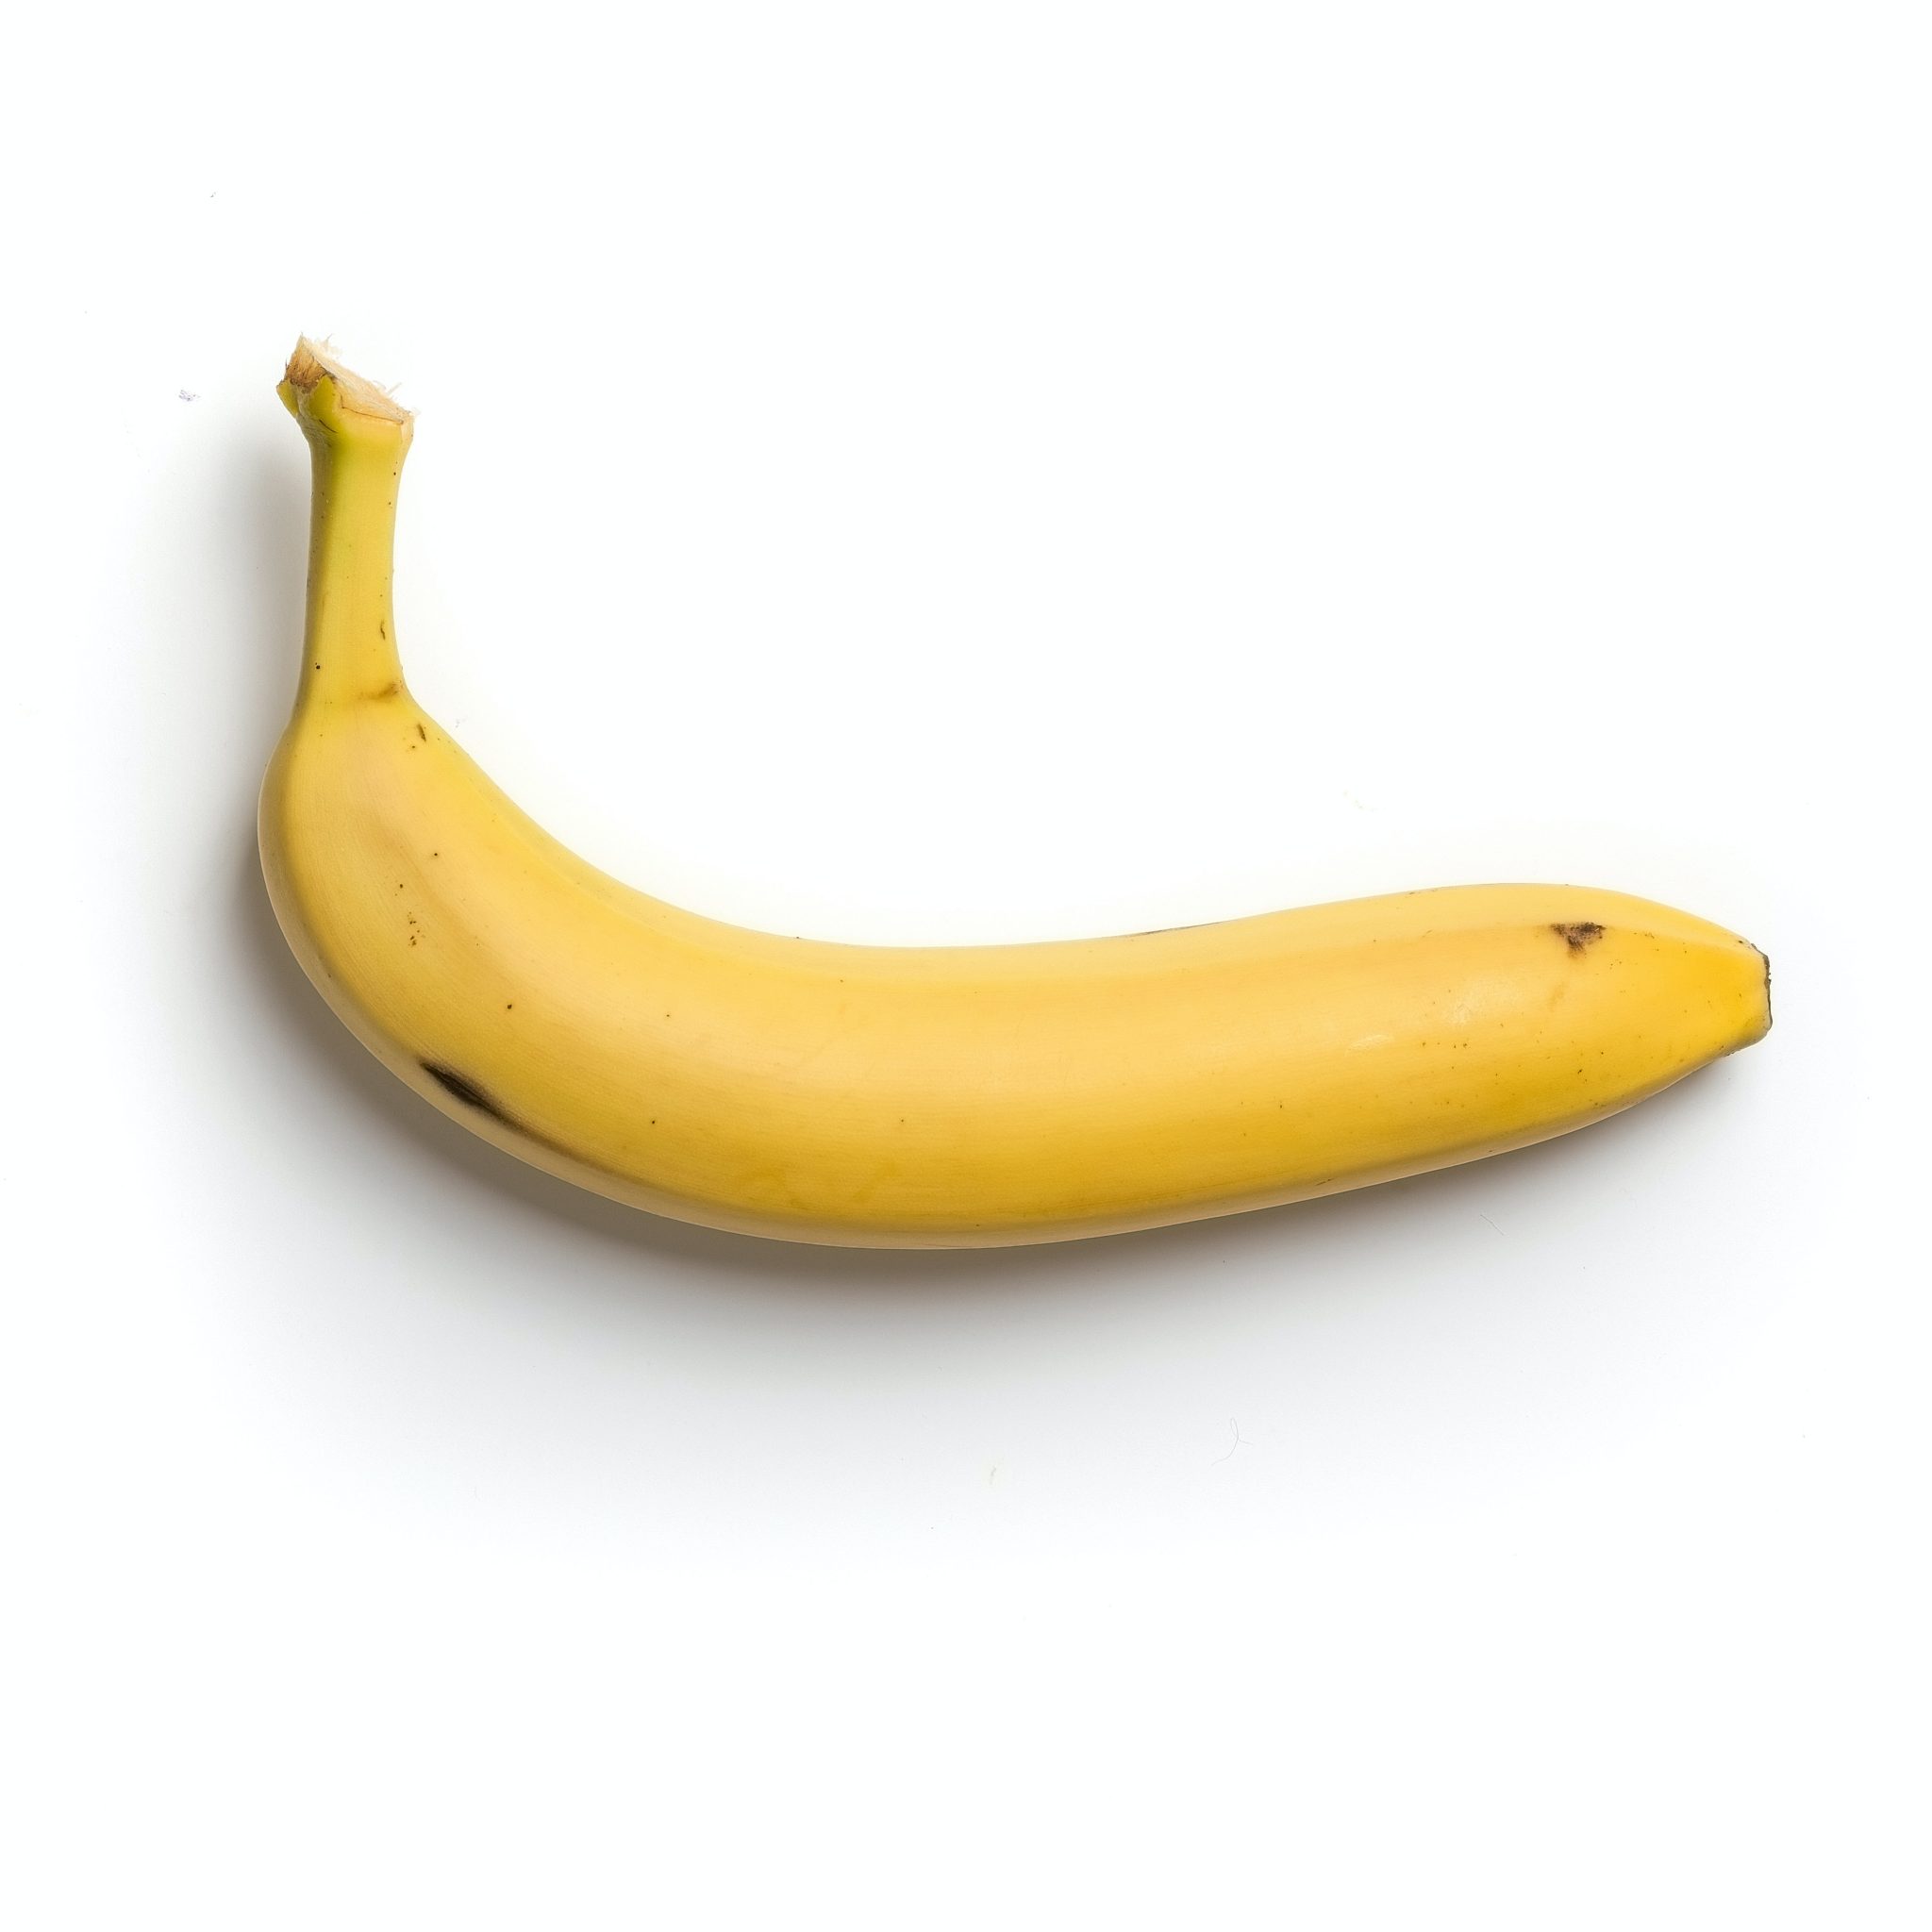 urologist Pornography sex toys Eating Healthy Penis Extenders yellow banana on white background